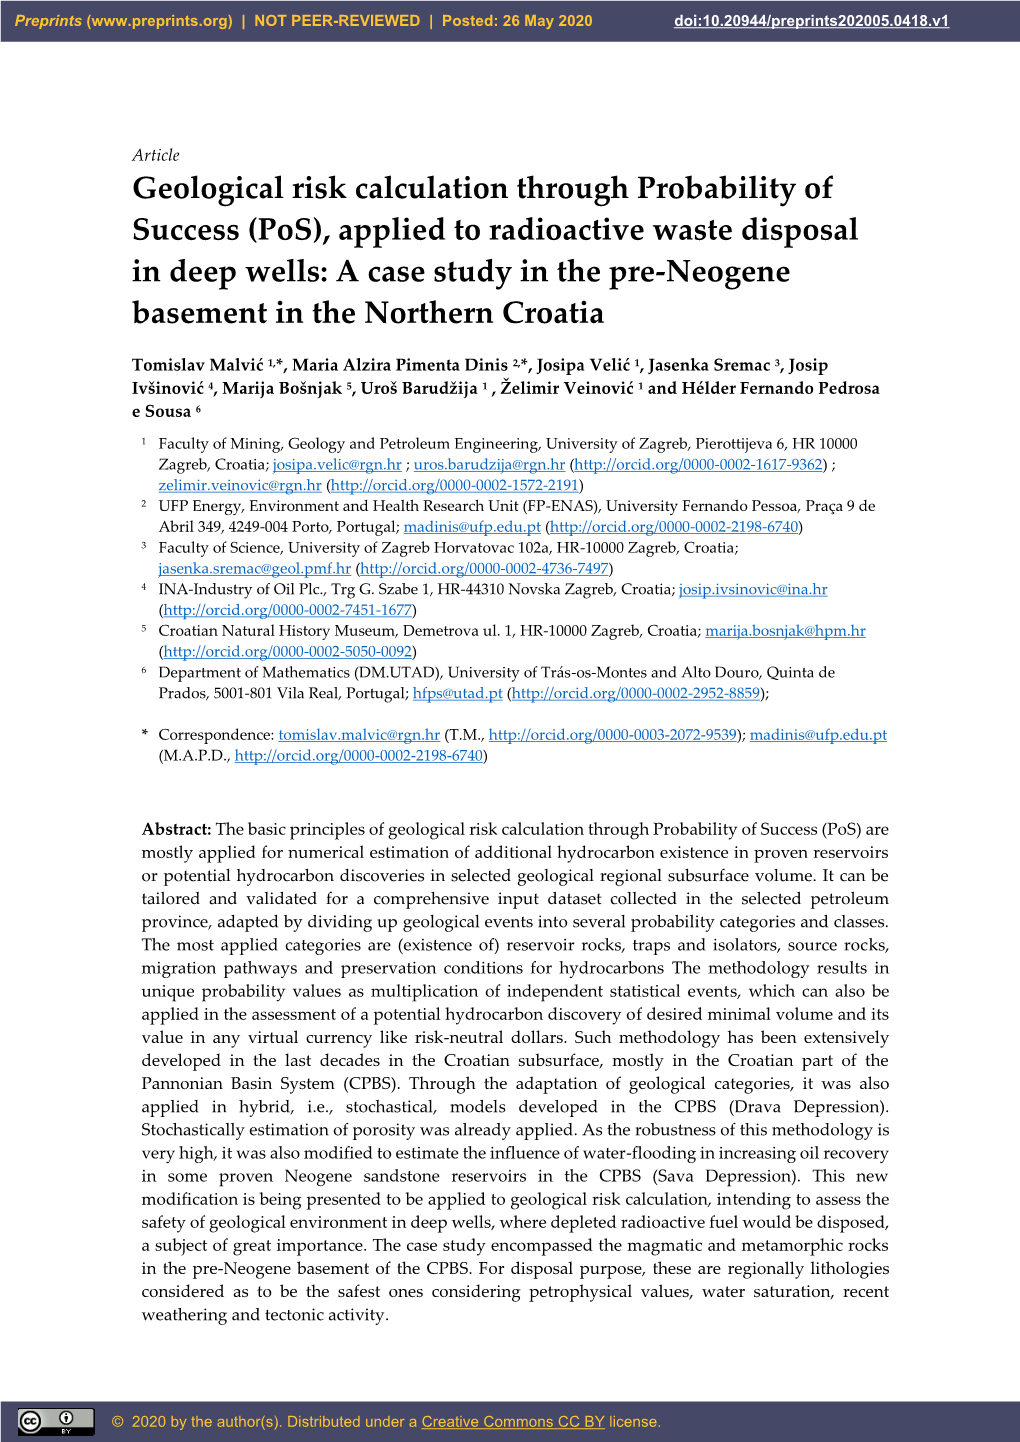 (Pos), Applied to Radioactive Waste Disposal in Deep Wells: a Case Study in the Pre-Neogene Basement in the Northern Croatia